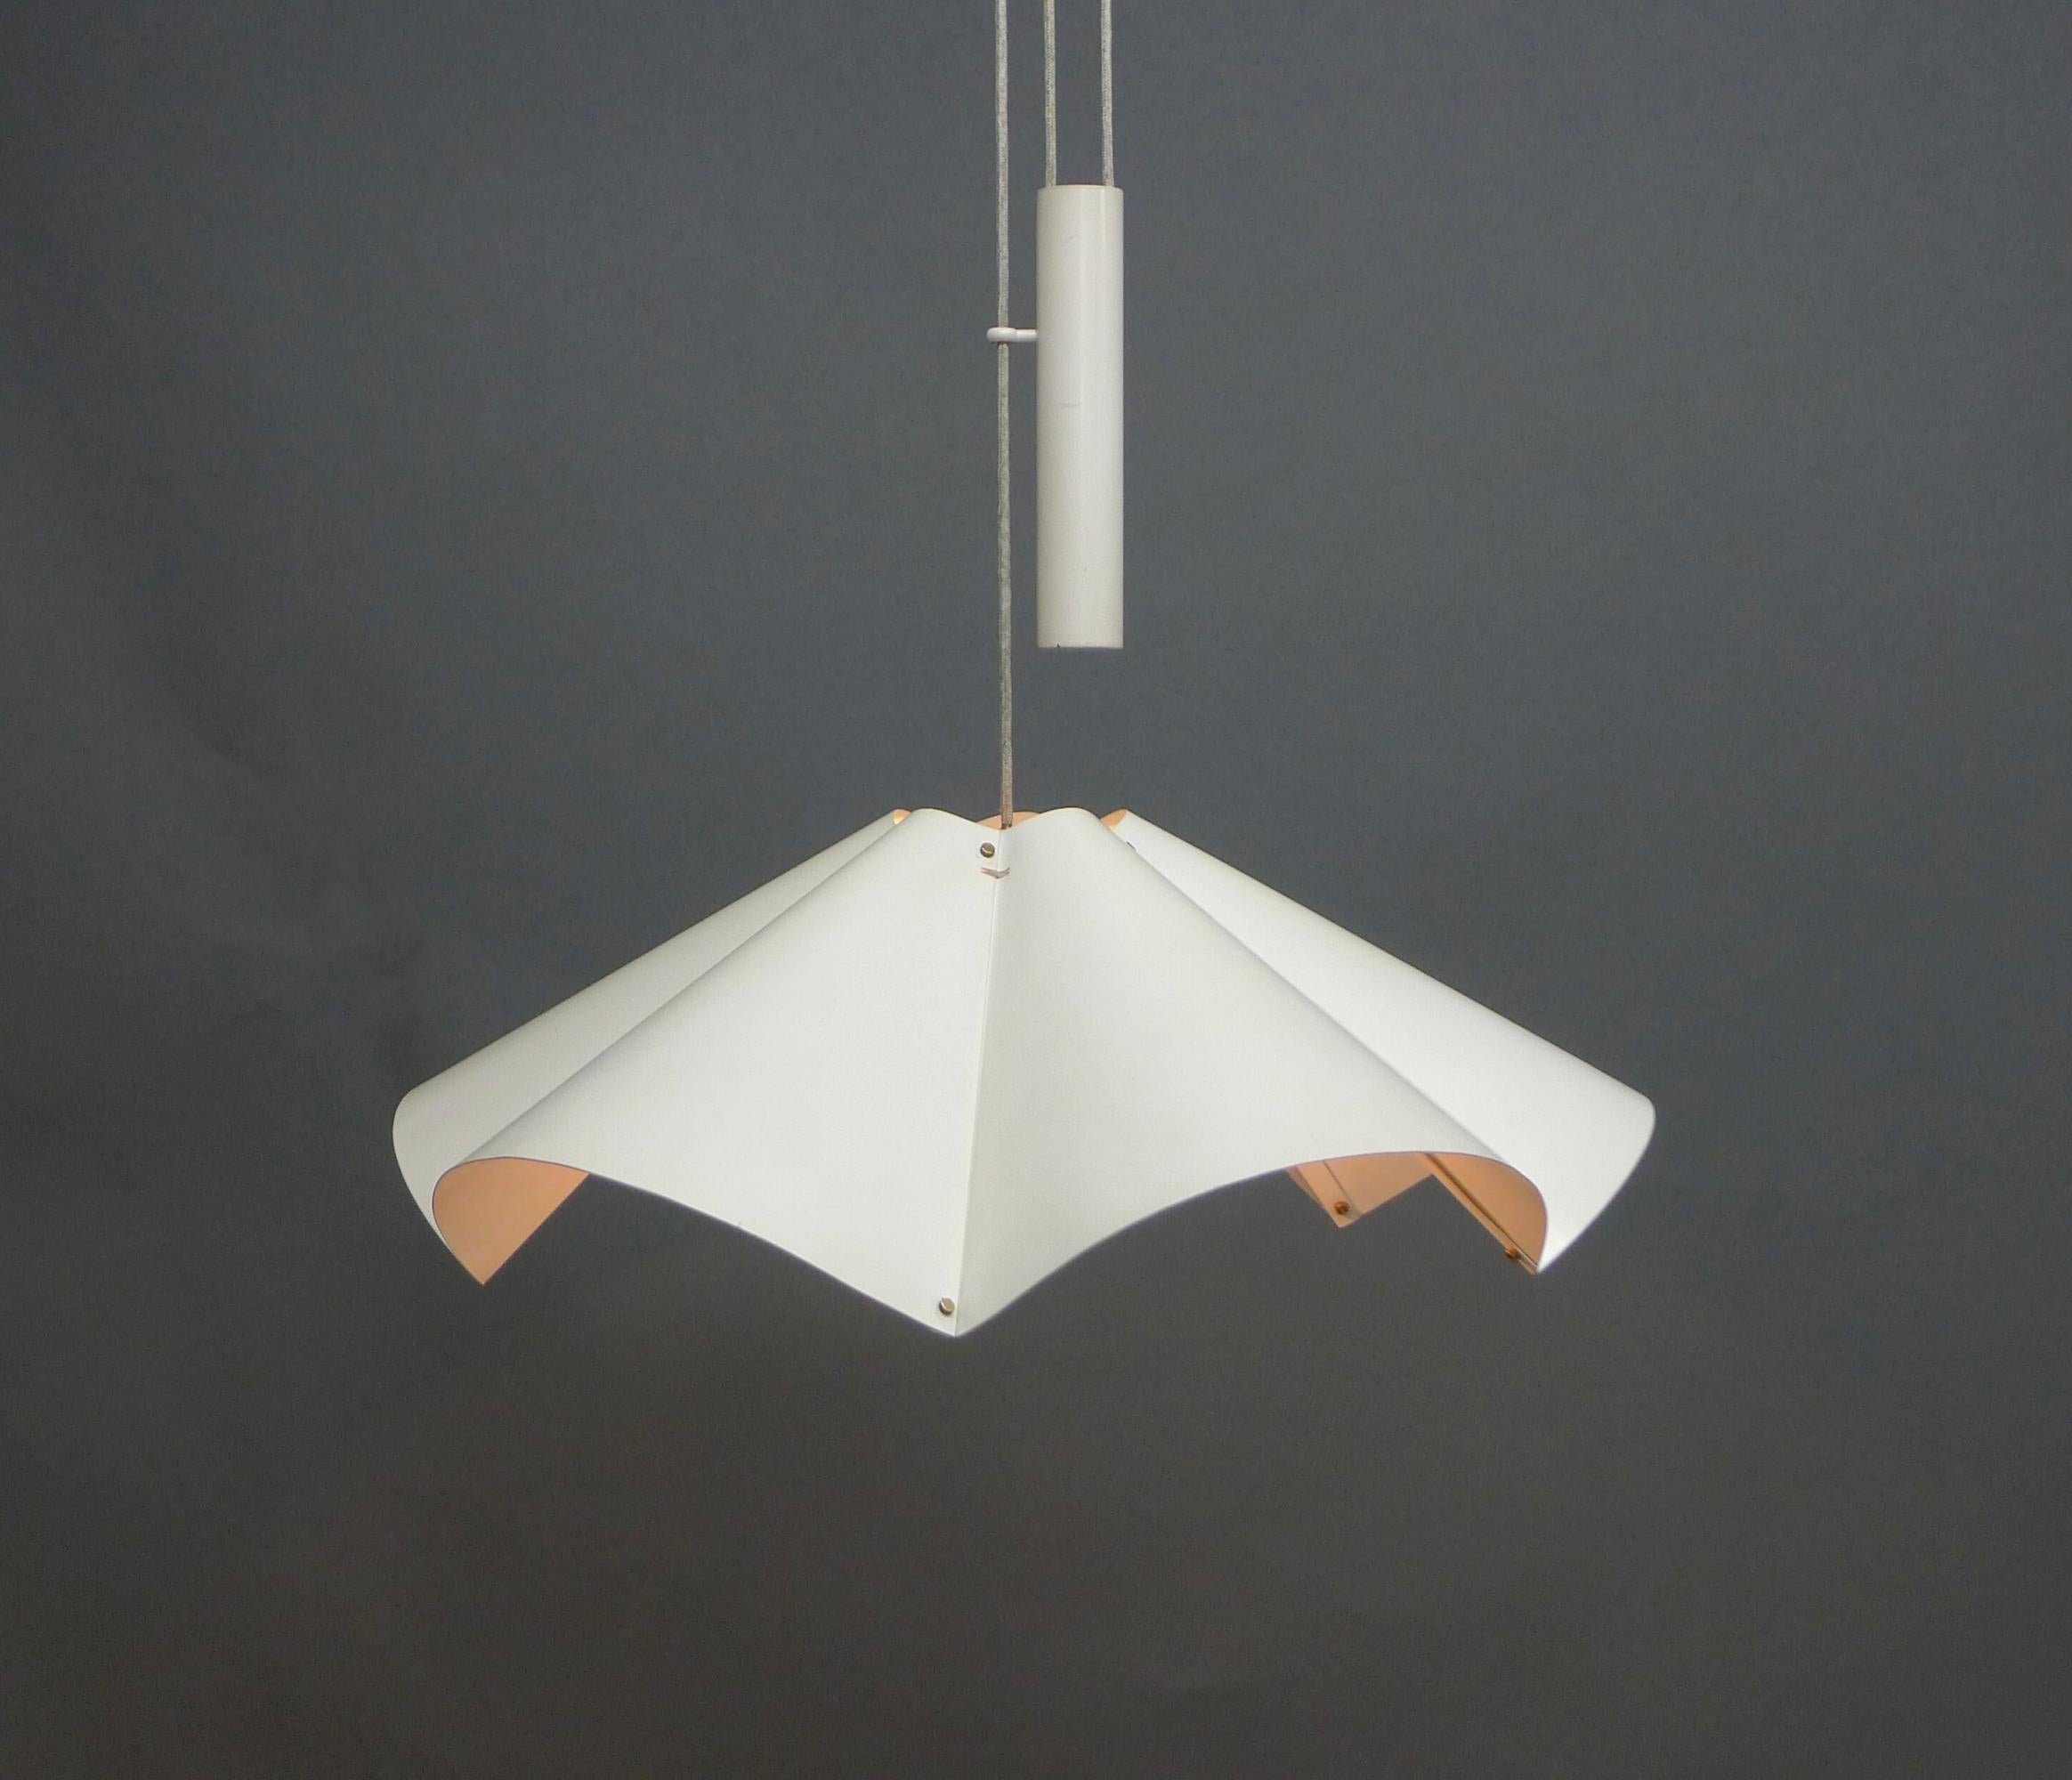 Gino Sarfatti, Rise and Fall Pendant Light, model 2134, designed by Sarfatti and made by his company Arteluce in the 1950s.

Comprising a fluted circular aluminium shade painted in off-white on a cord with rise and fall handle, allowing the shade to